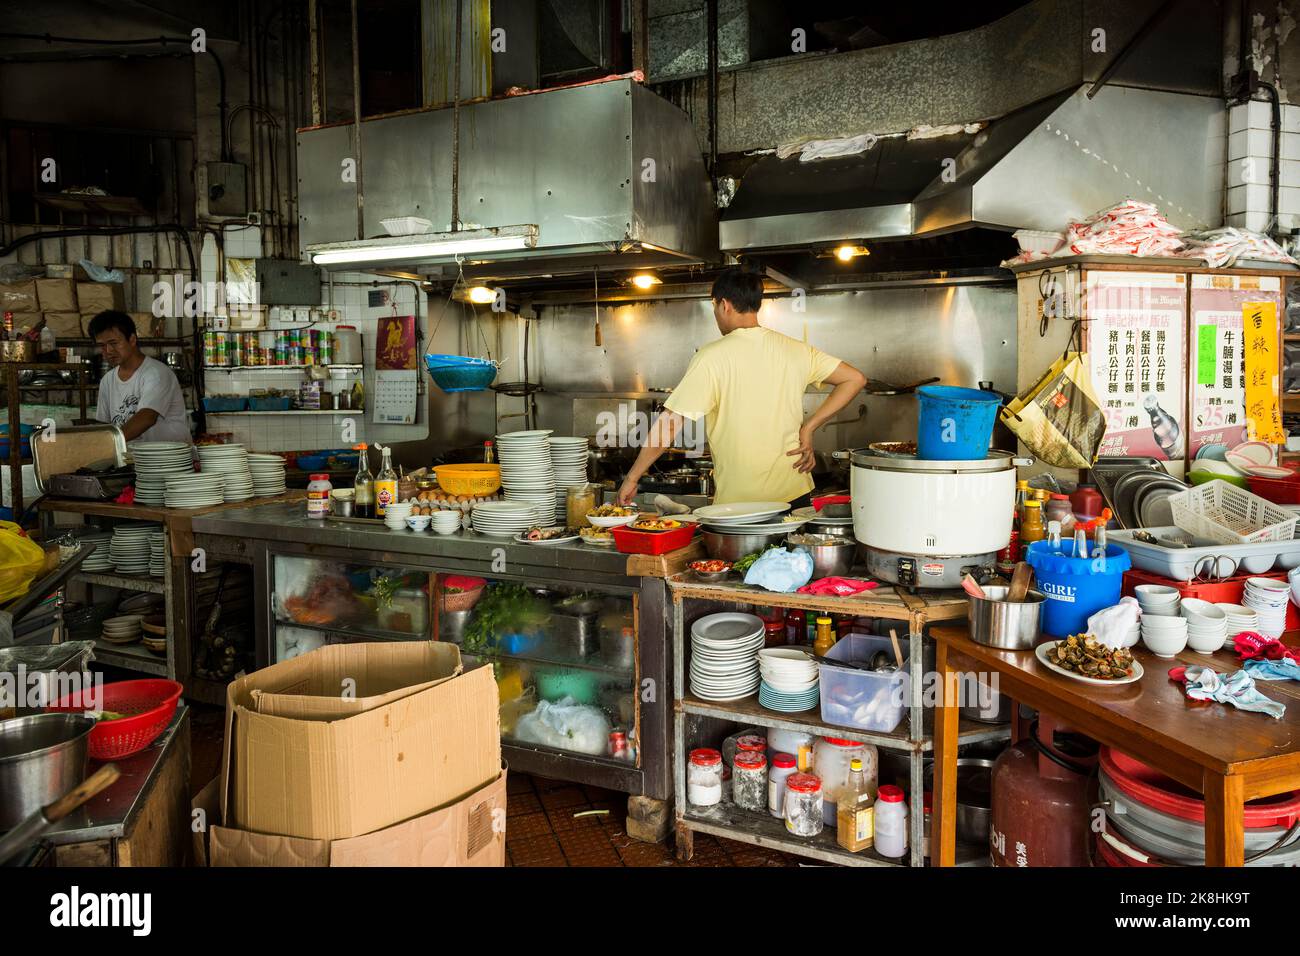 The kitchen of an open-air seafood restaurant at Mui Wo Cooked Food Market, Lantau Island, Hong Kong, 2008 Stock Photo